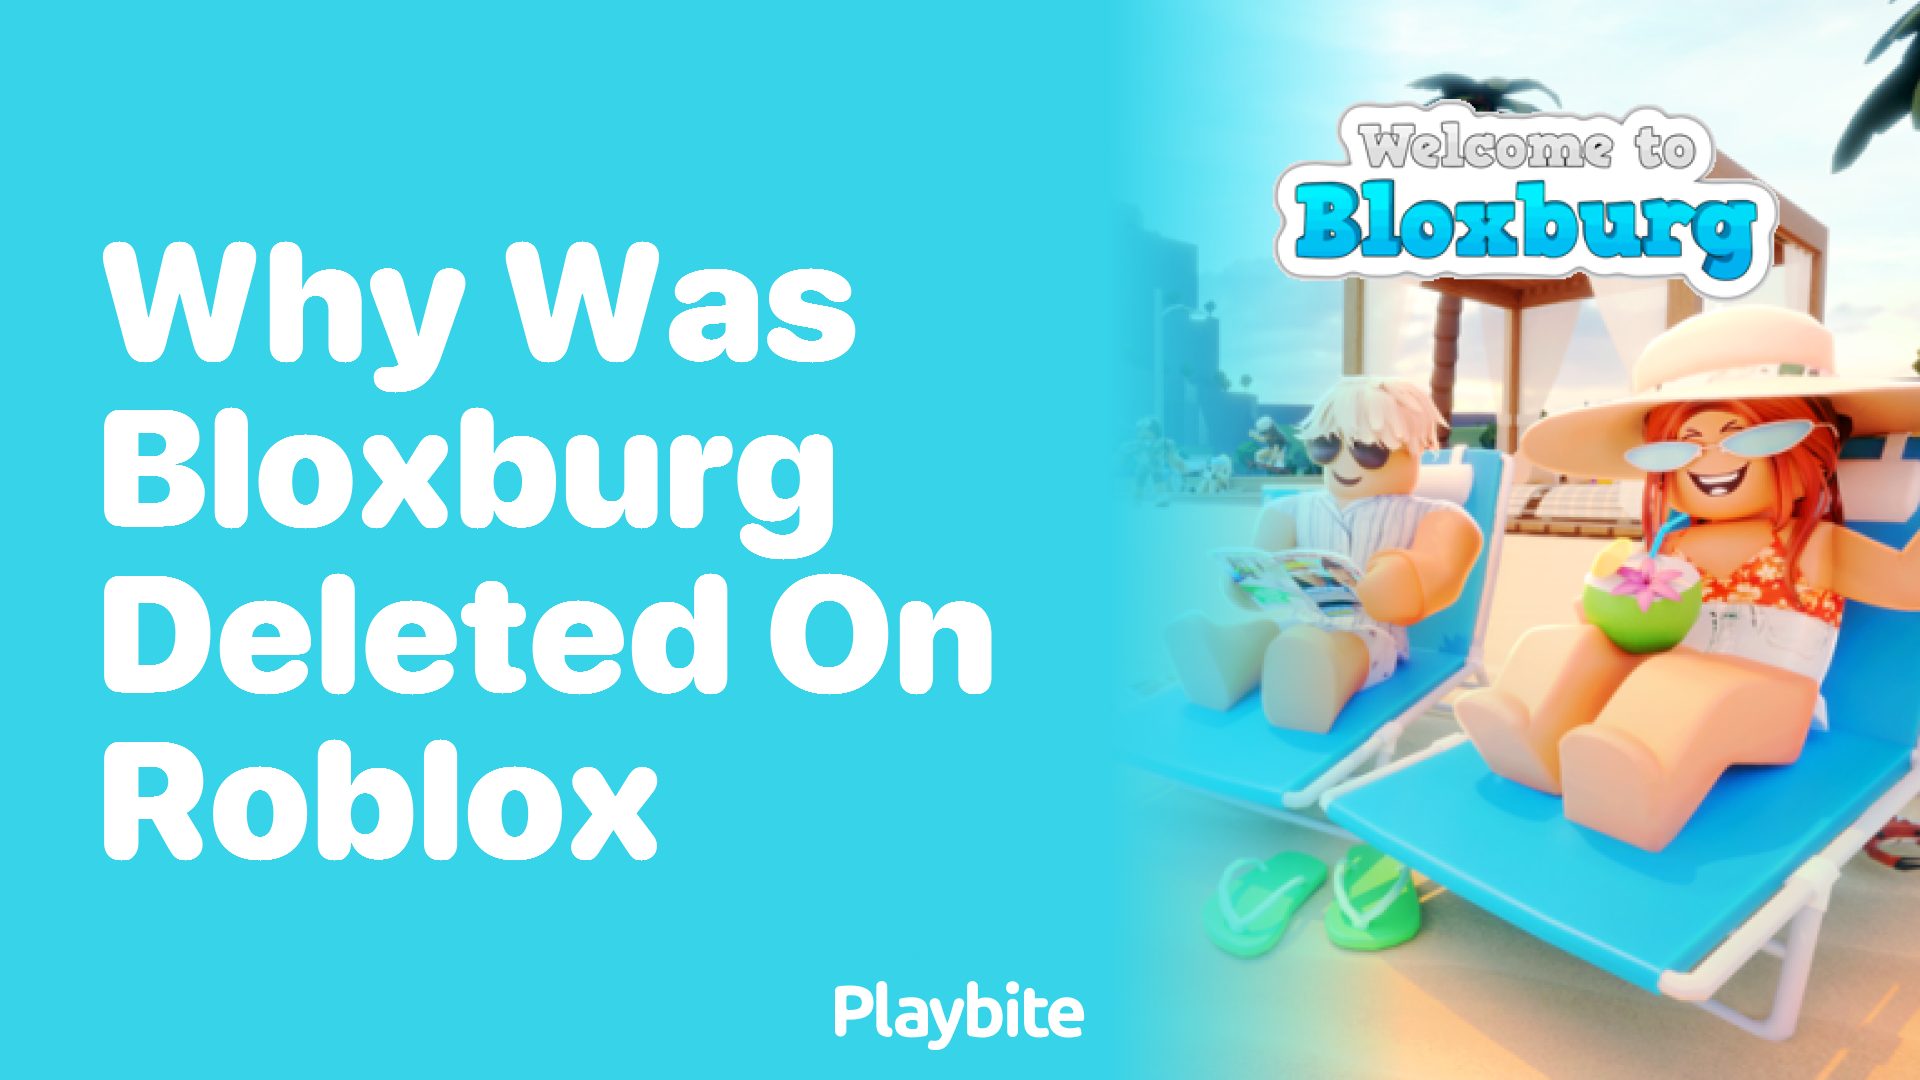 Why Was Bloxburg Deleted on Roblox?